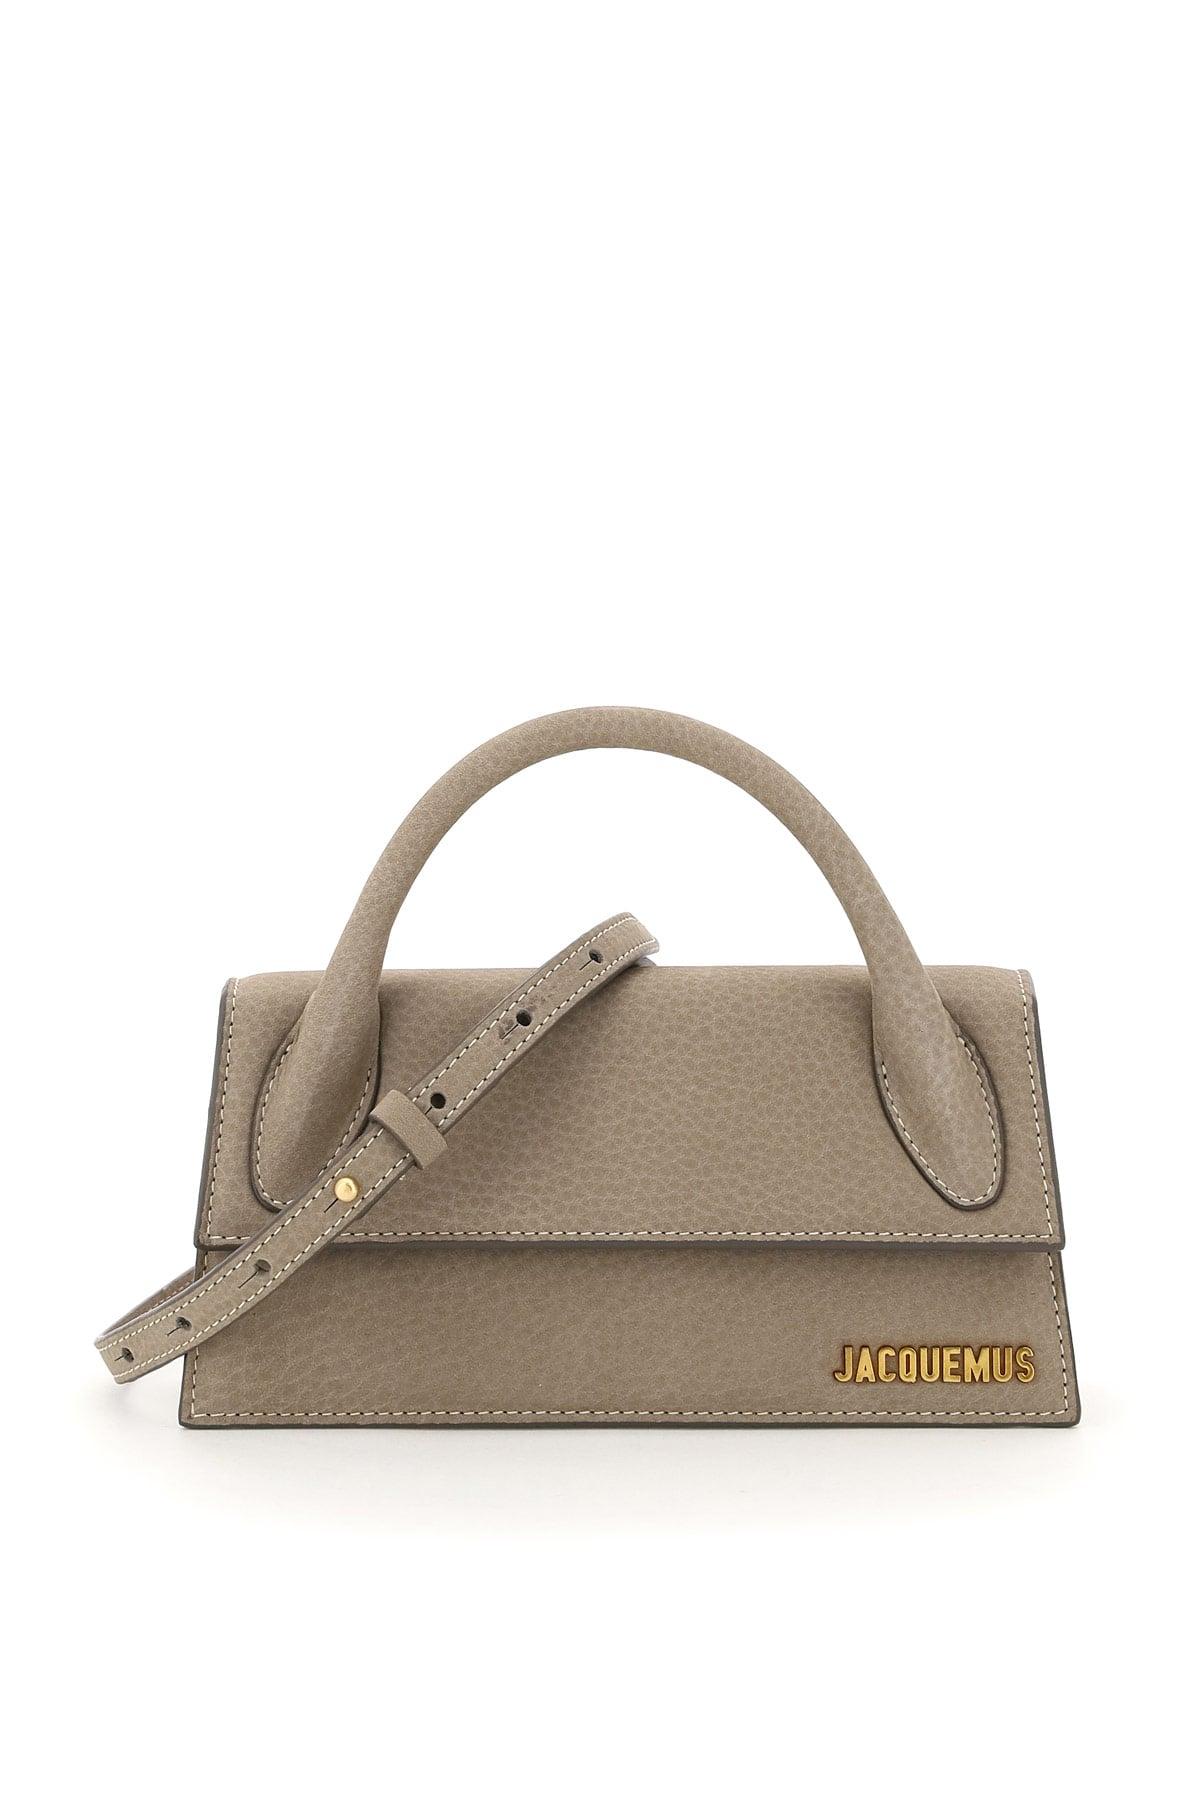 Jacquemus Le Chiquito Long Bag in Natural | Lyst